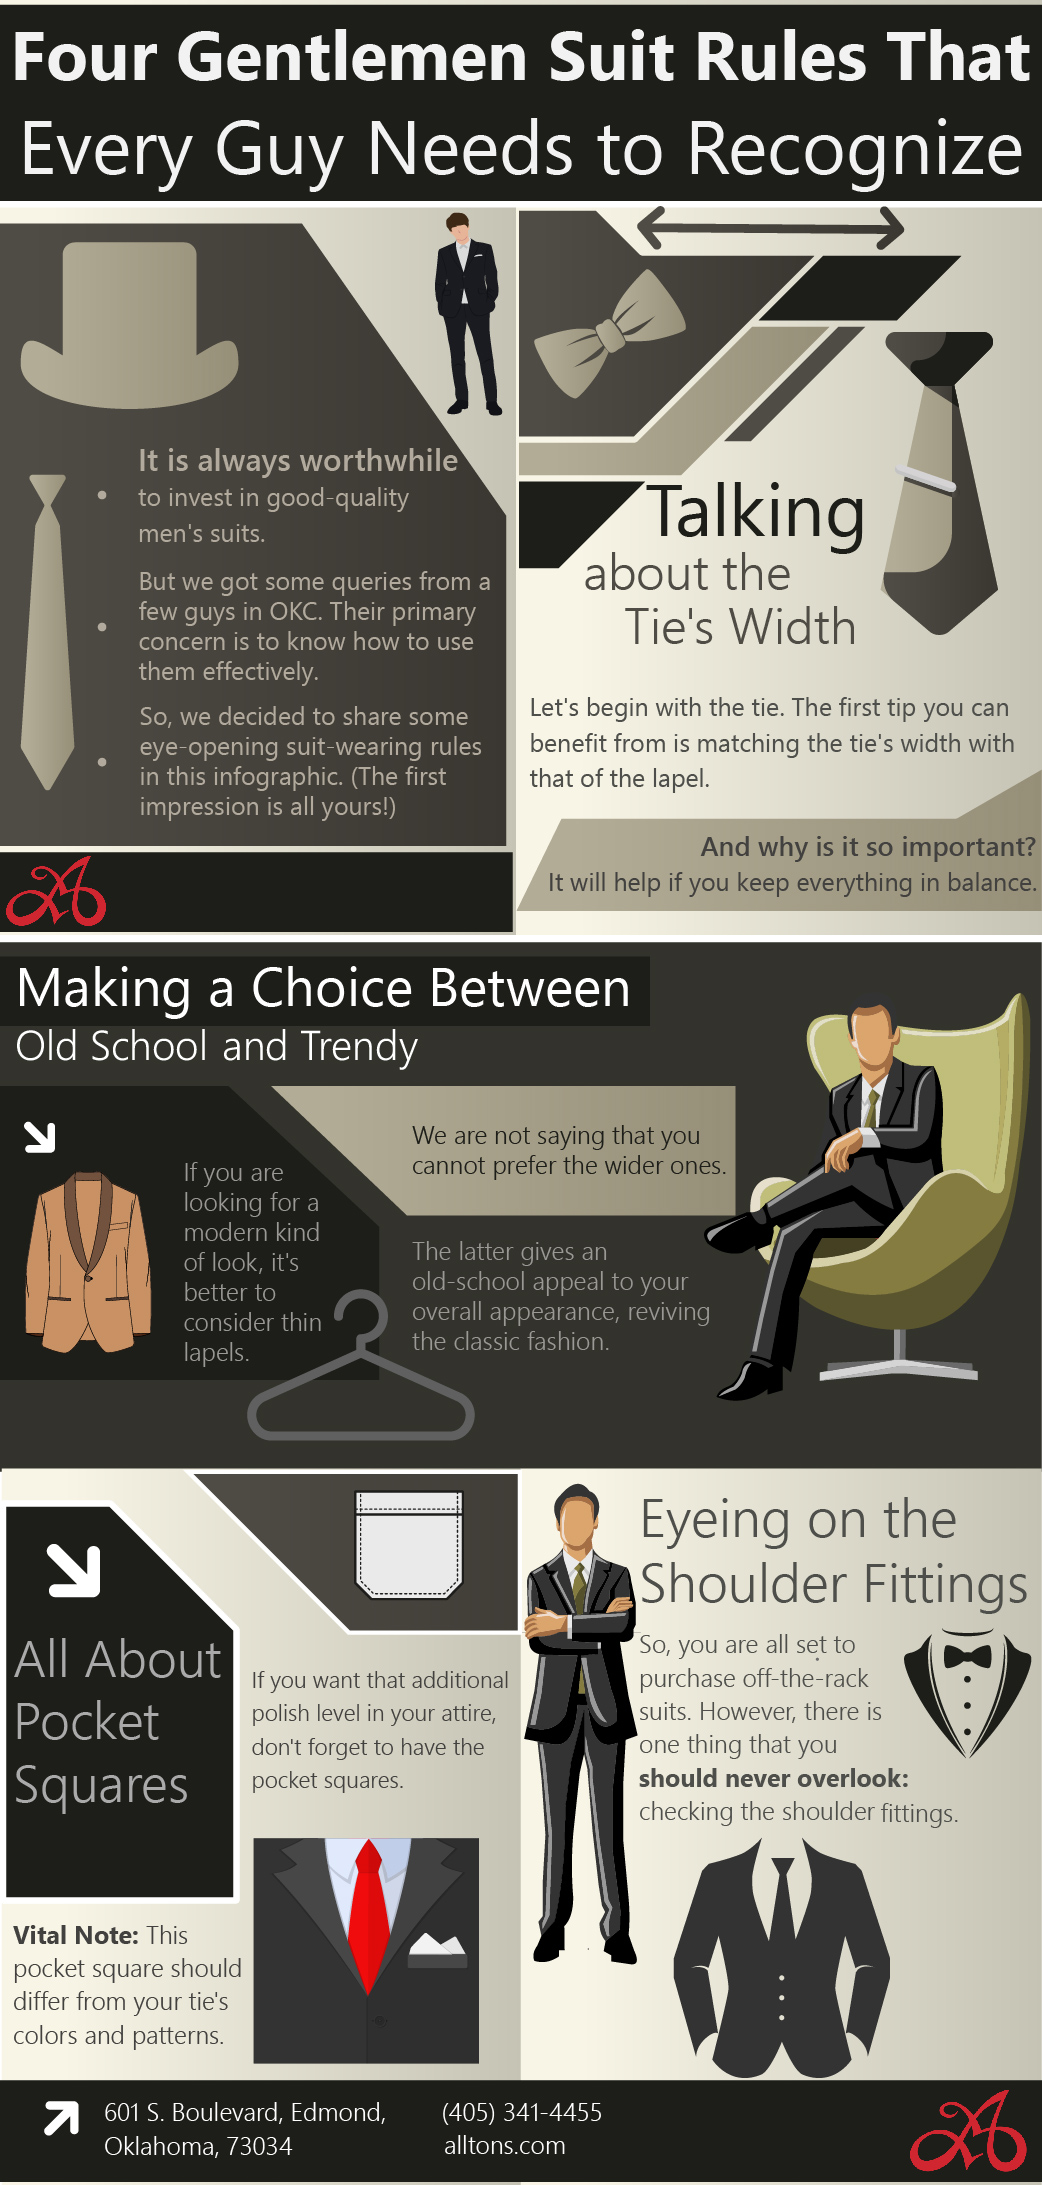 Four Gentlemen Suit Rules That Every Guy Needs to Recognize